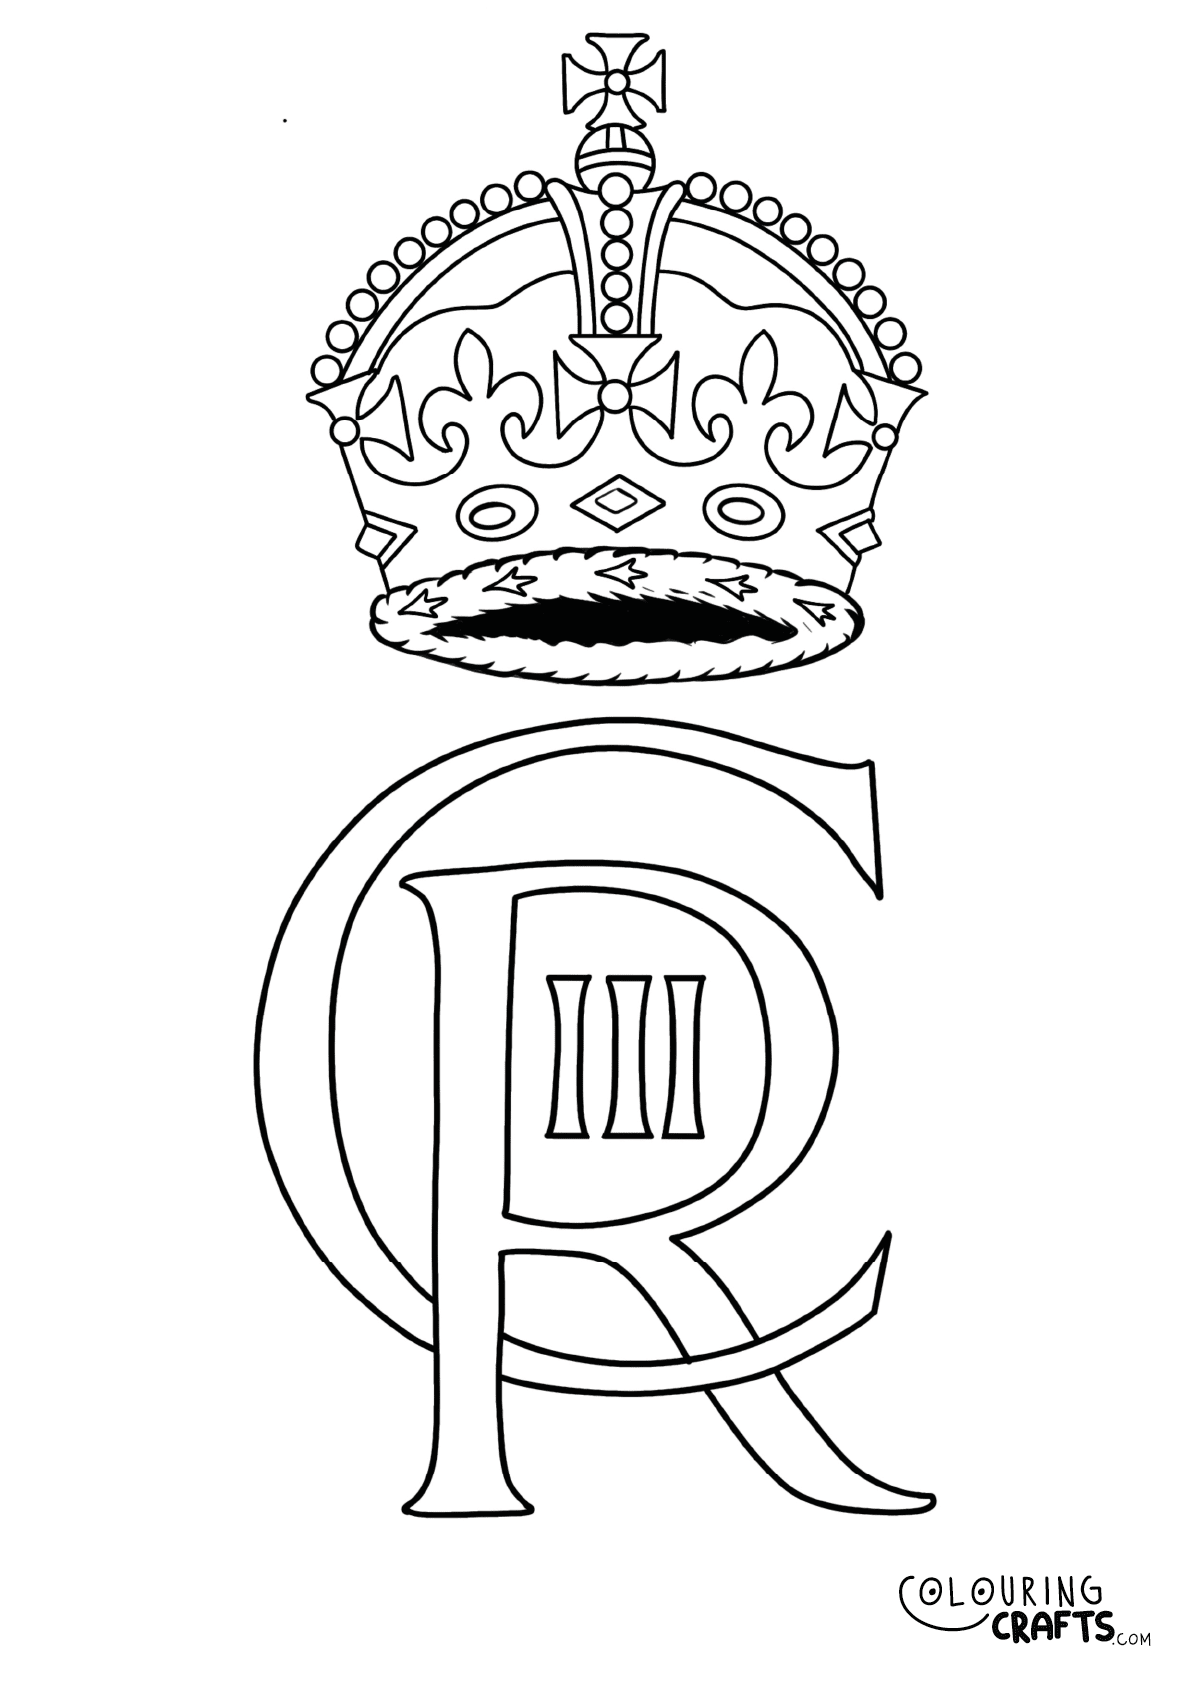 King Charles III Cypher Coronation Colouring Page - Colouring Crafts